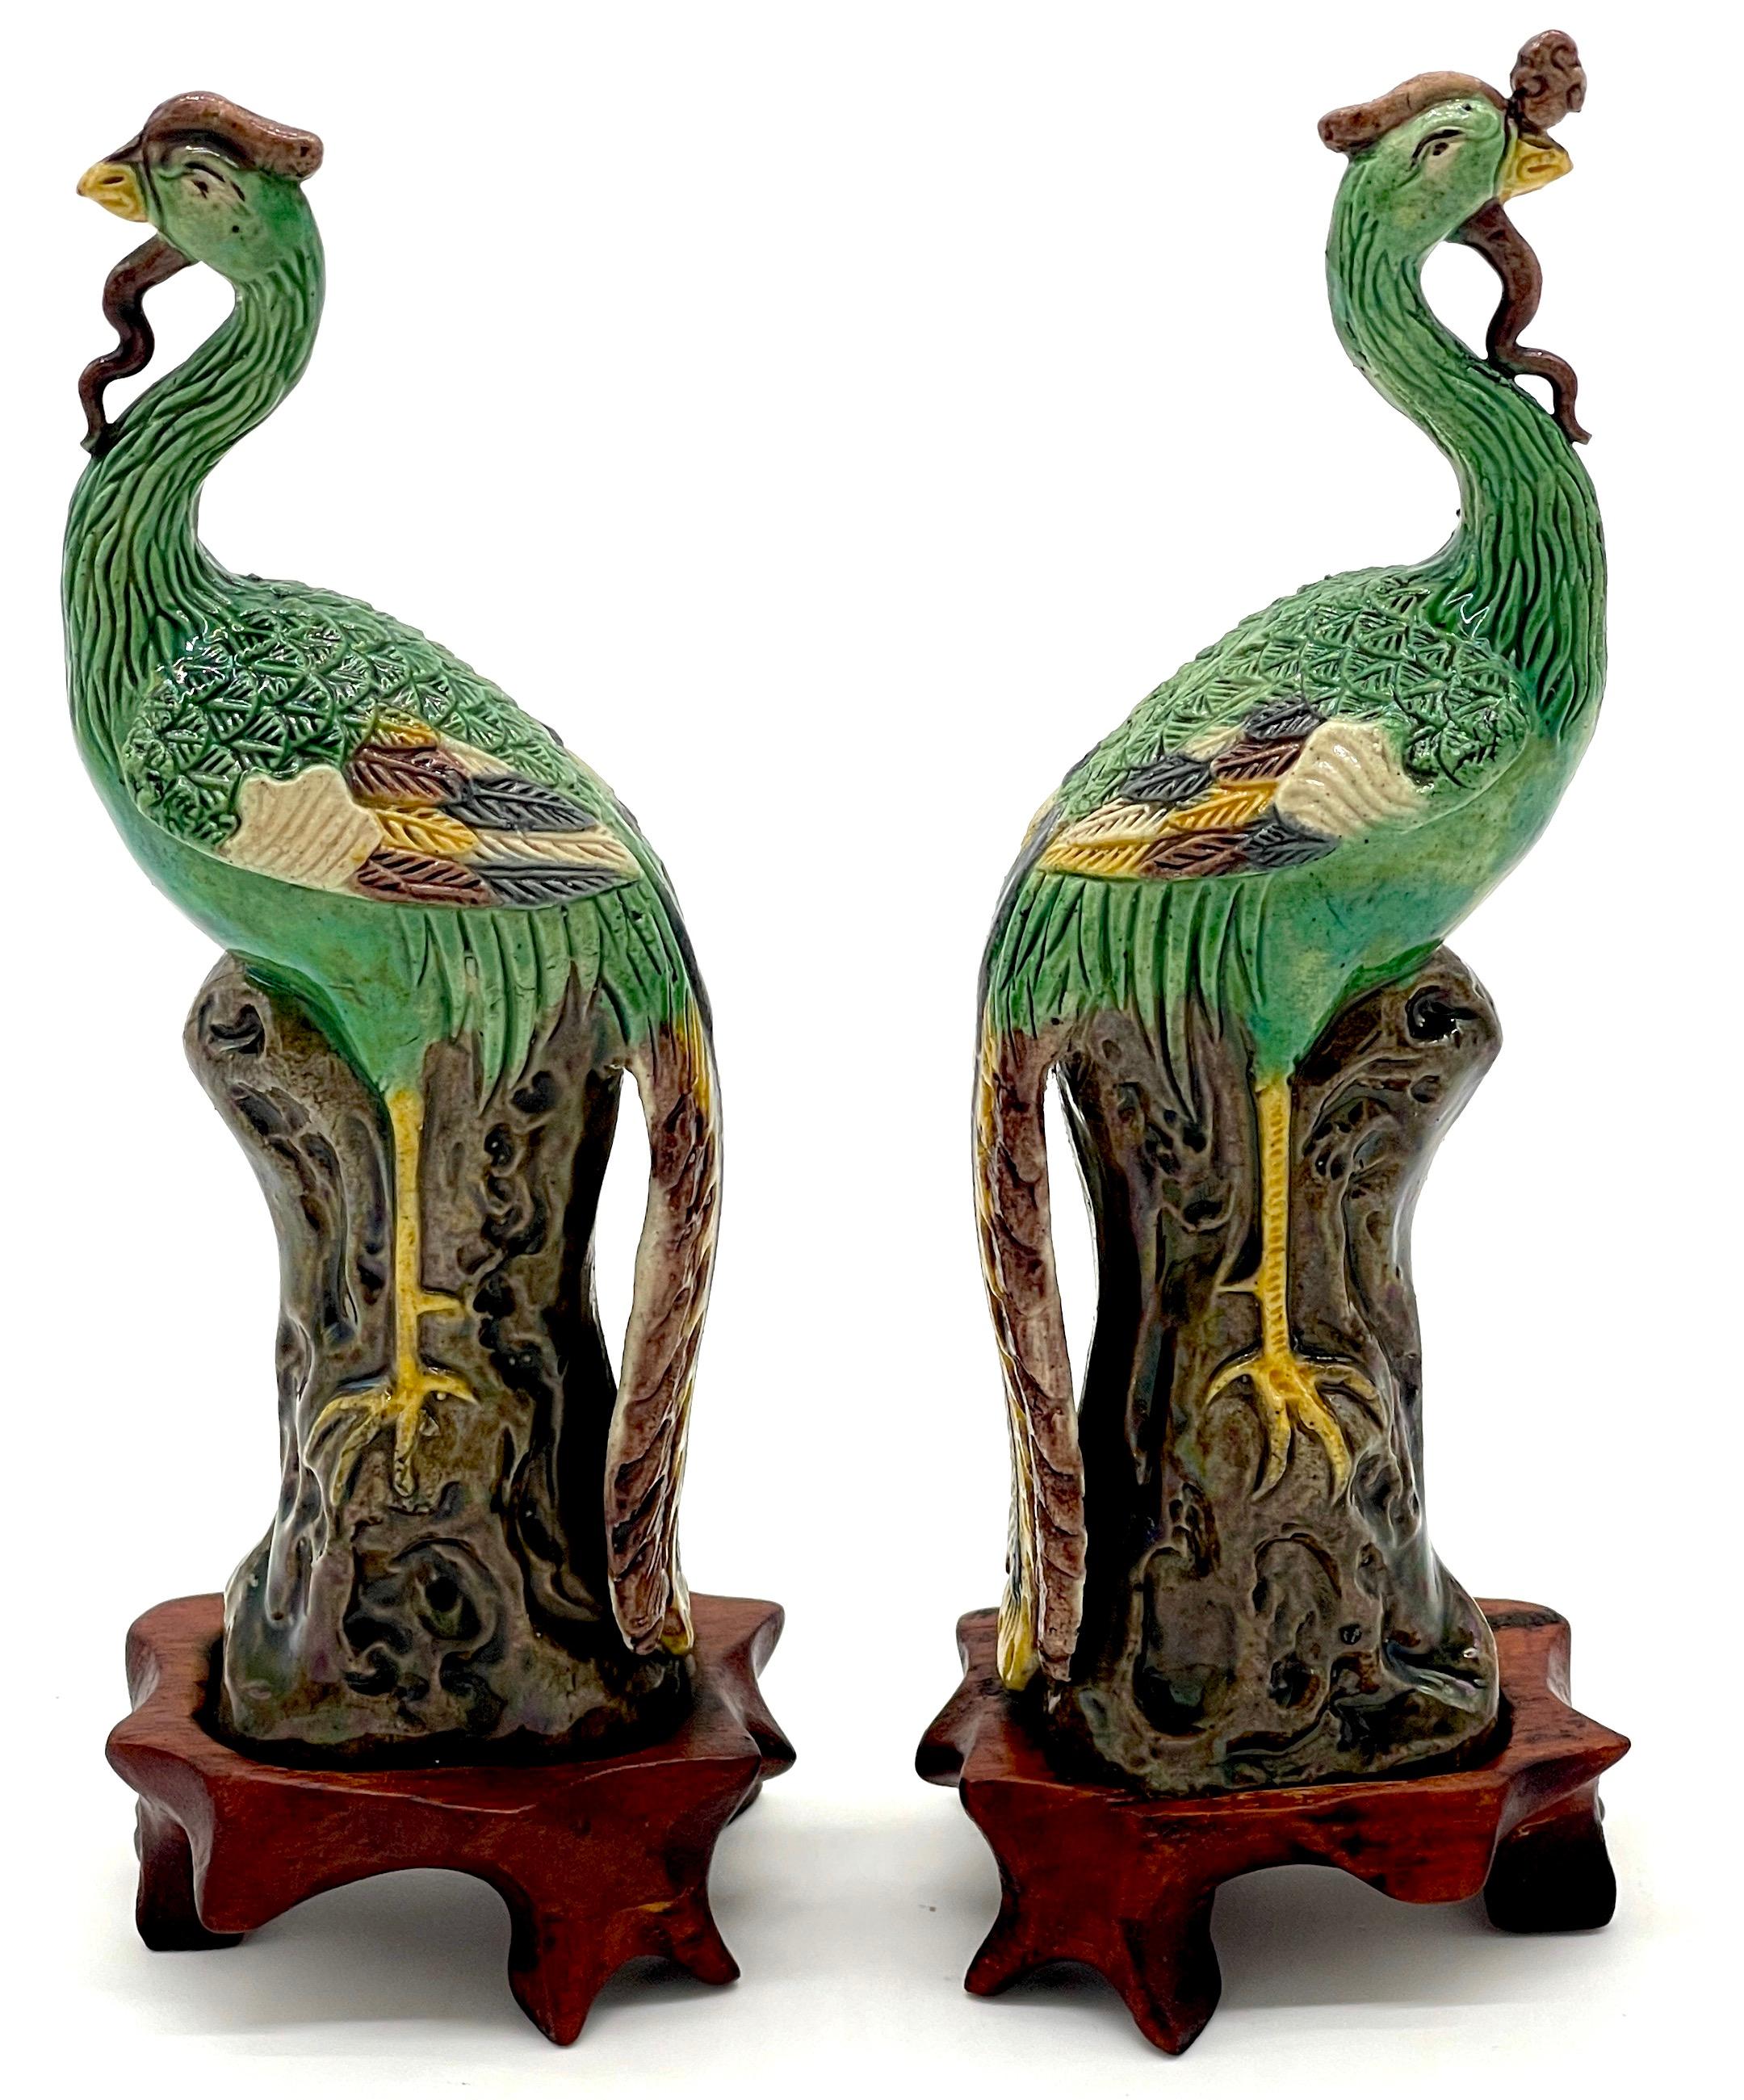 20th Century A Diminutive Pair of Chinese Sancai Glazed Phoenix Birds, on Hardwood Stands  For Sale